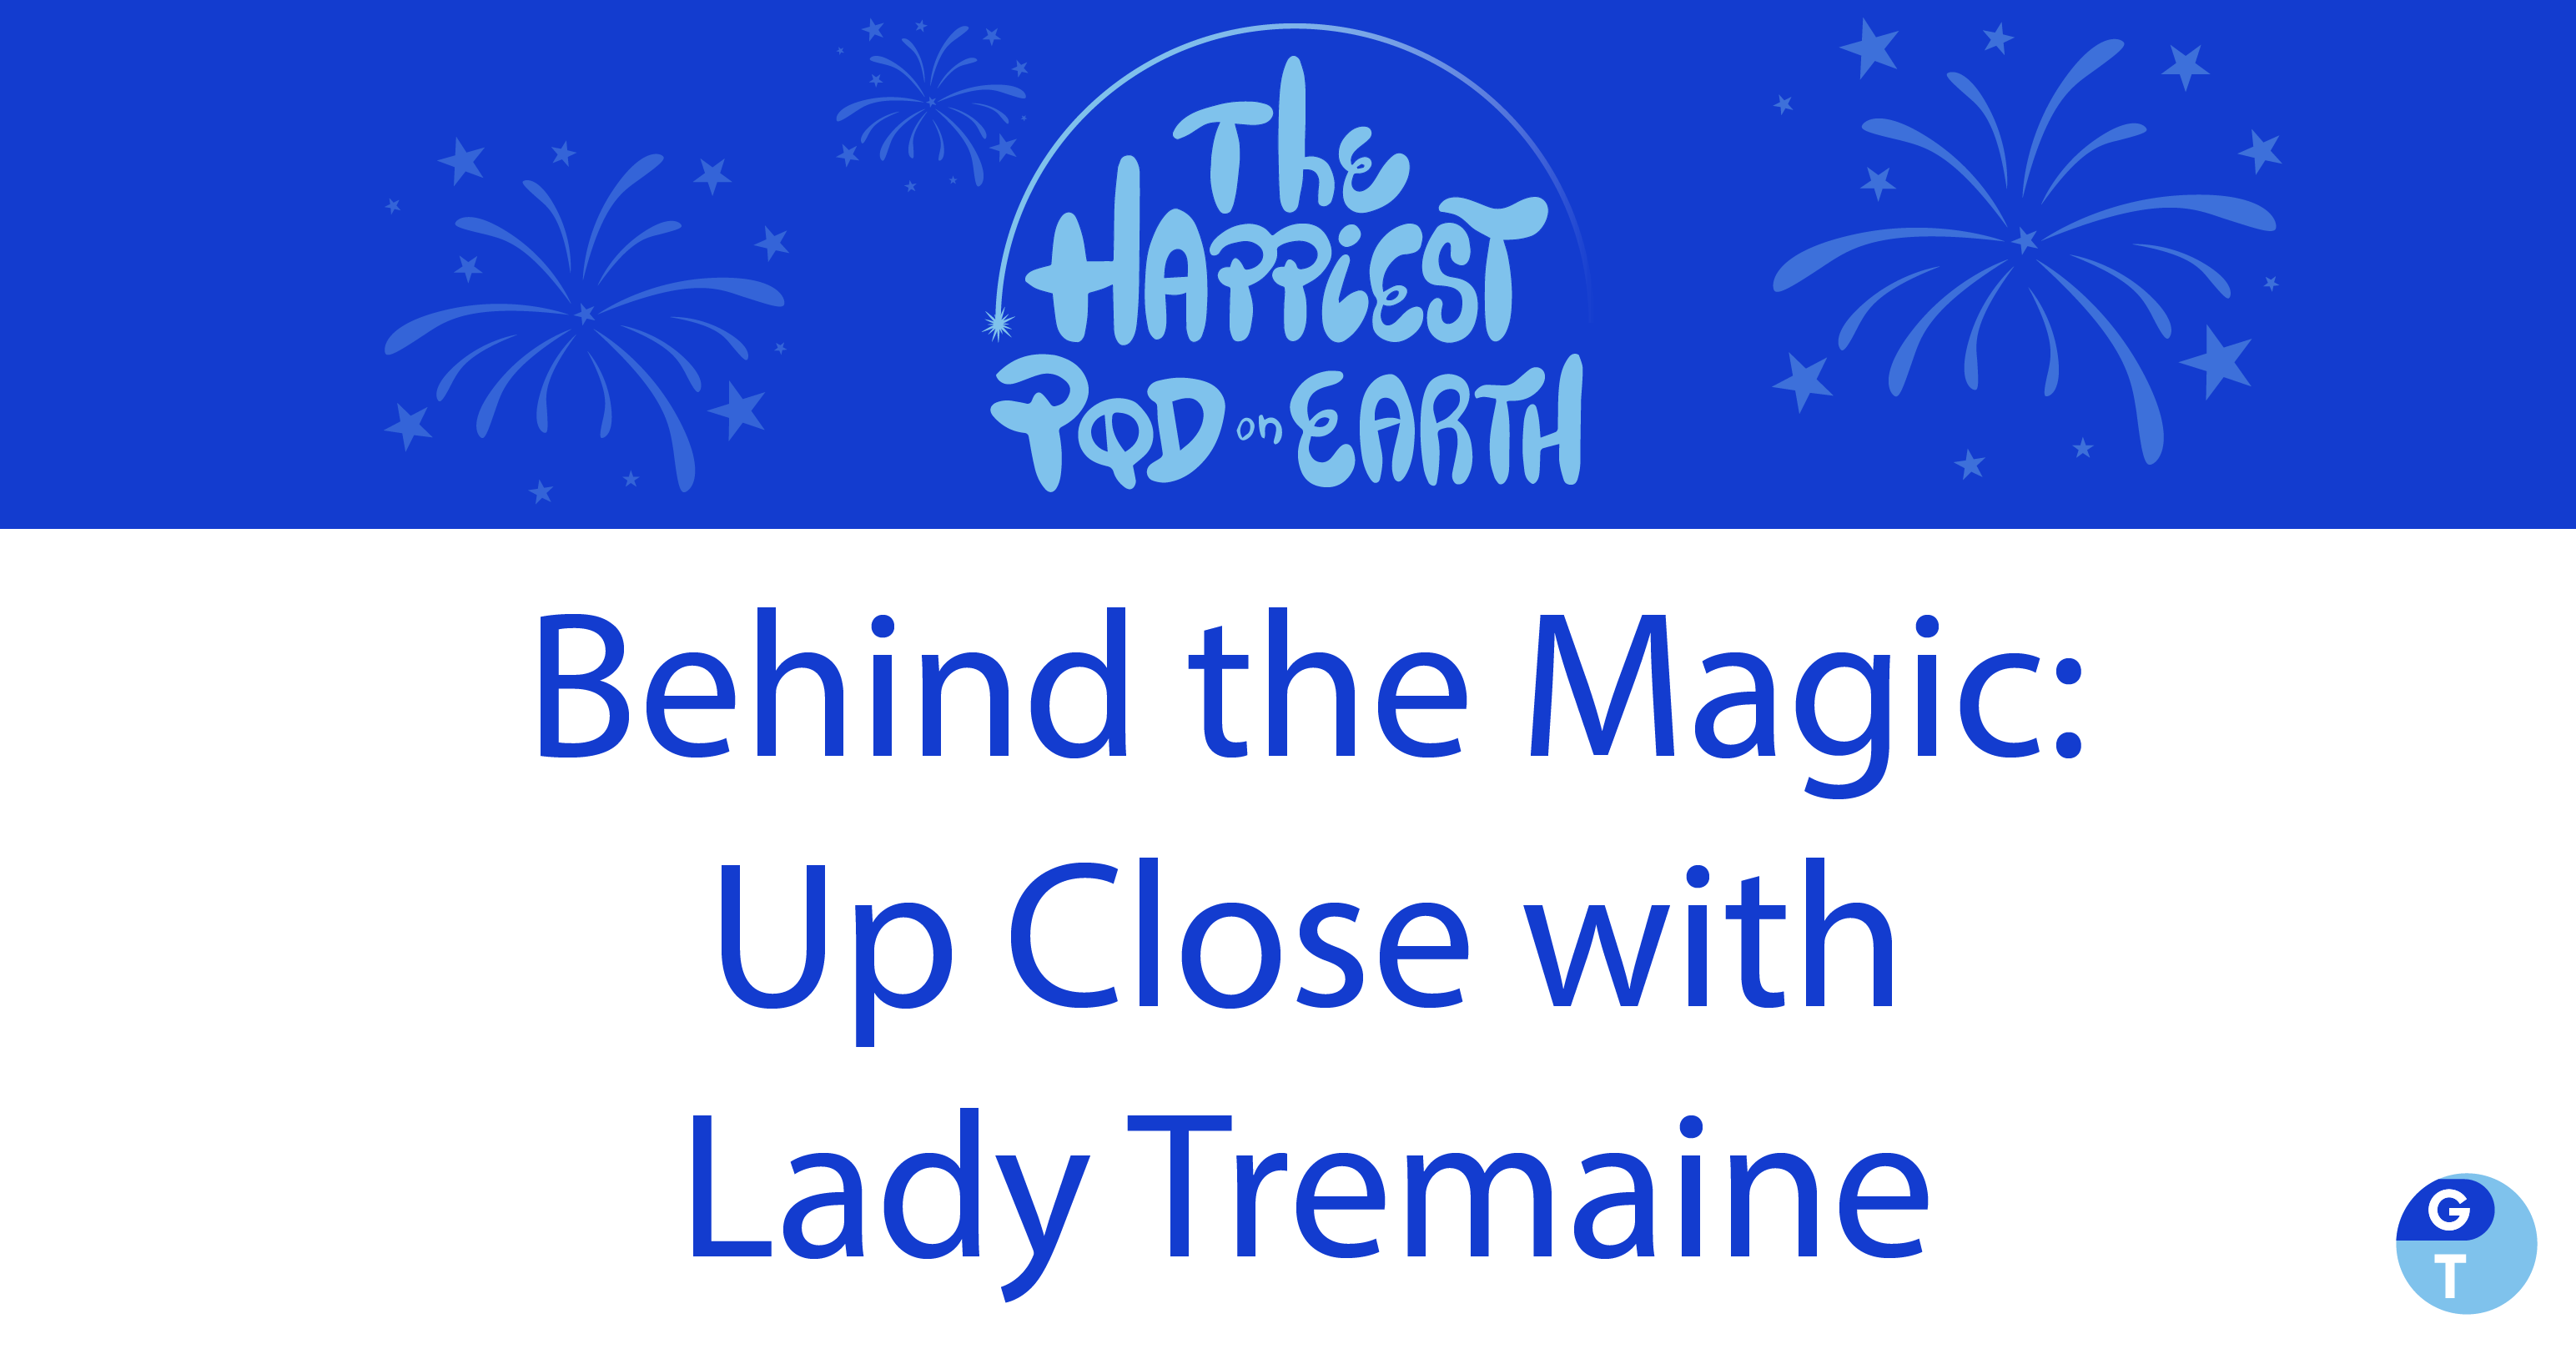 podcast logo of fireworks and podcast name "Behind the Magic Up Close with Lady Tremaine"